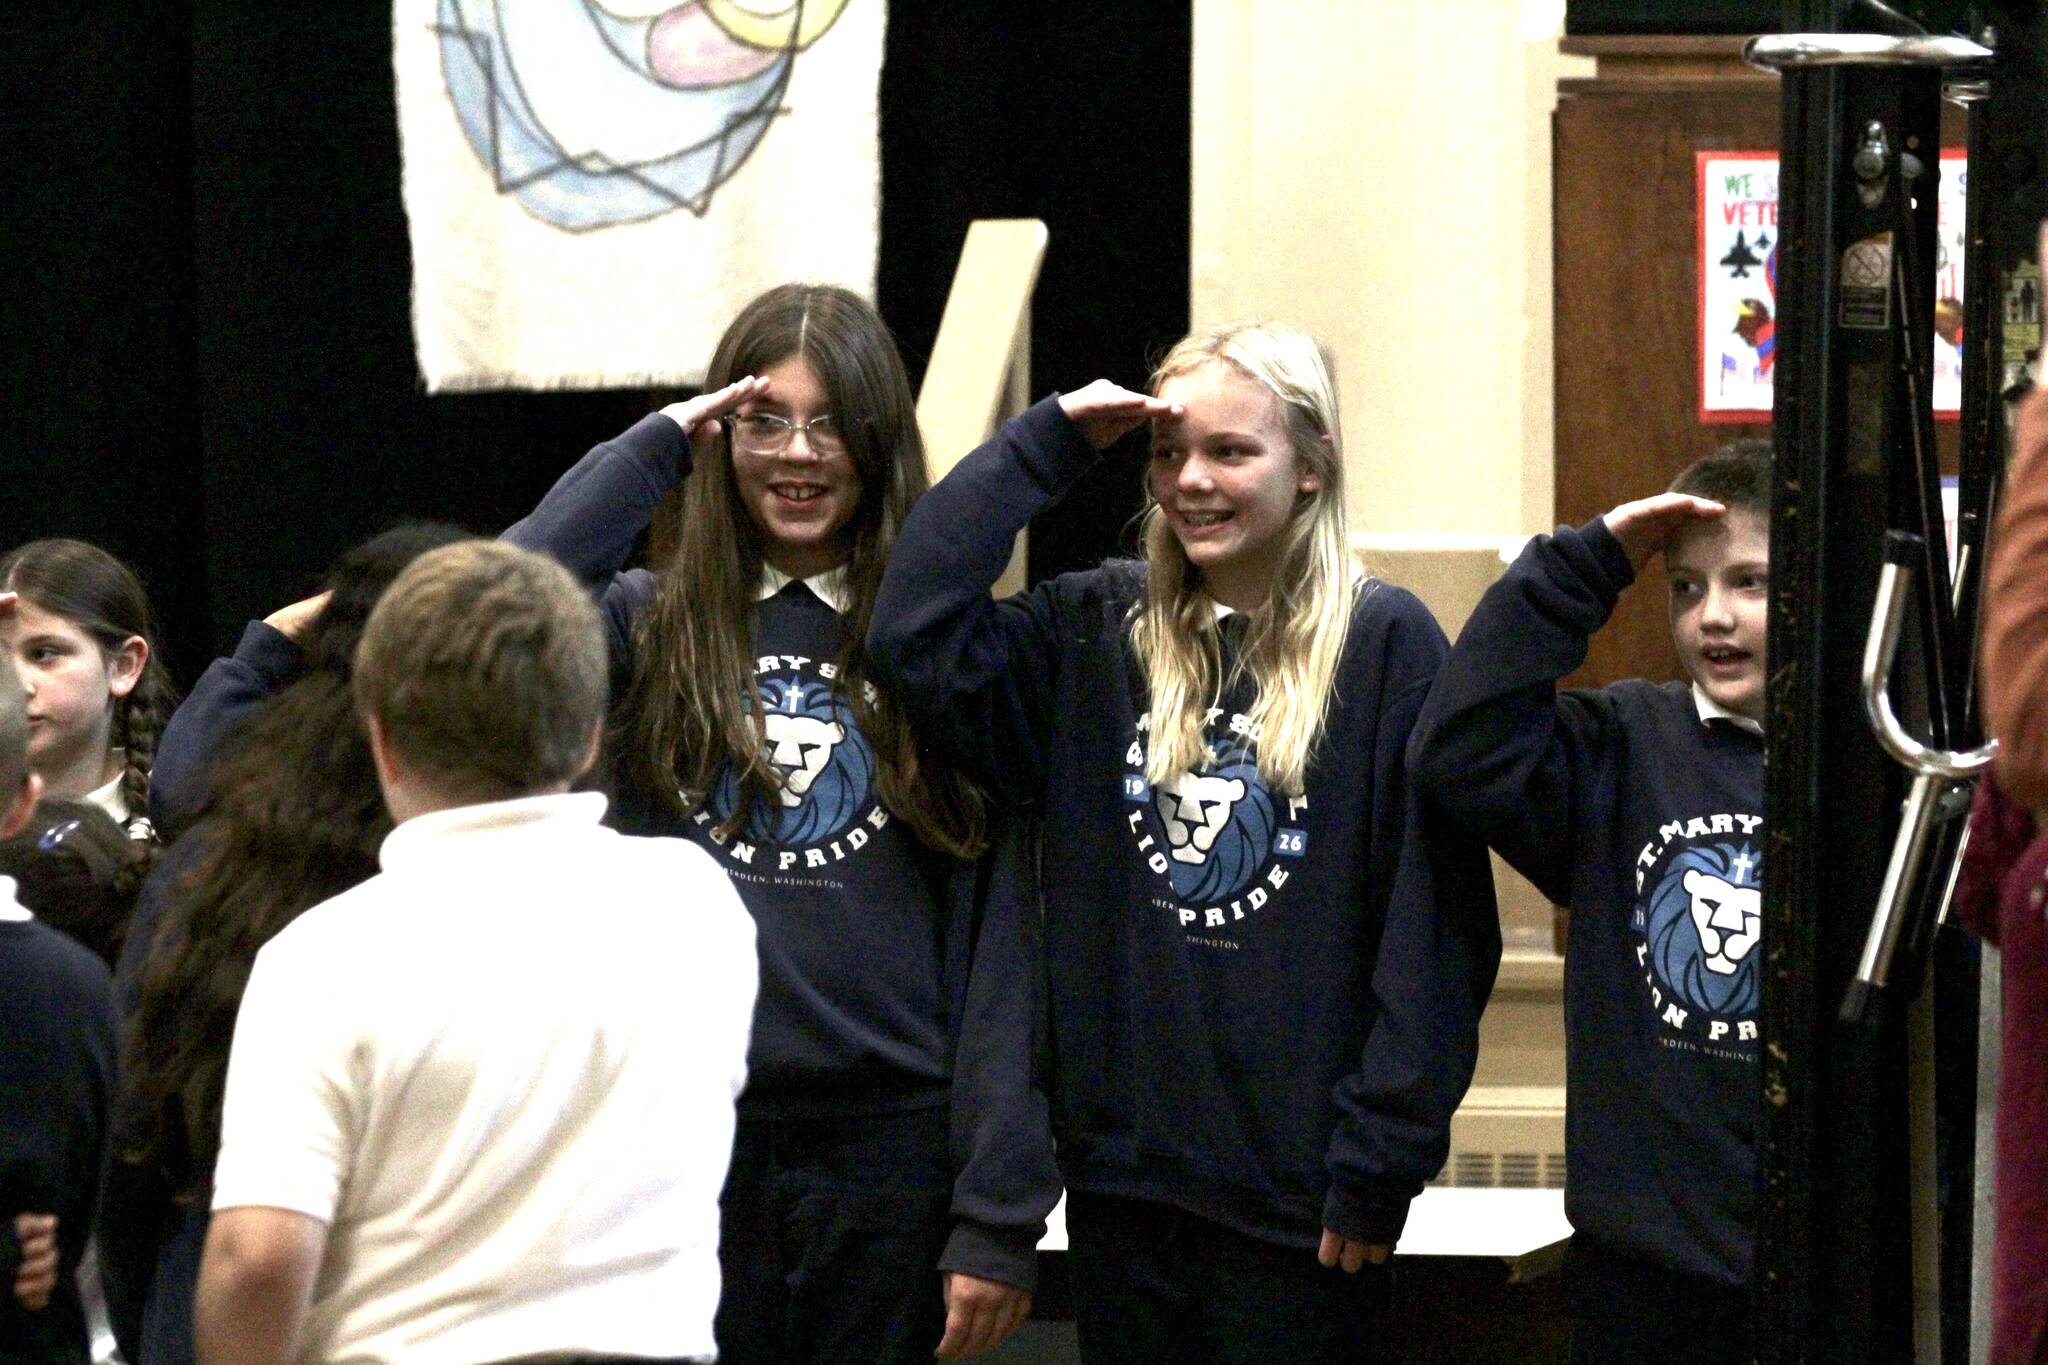 Michael S. Lockett / The Daily World
Students at St. Mary School salute for a Veterans Day assembly on Nov. 9.